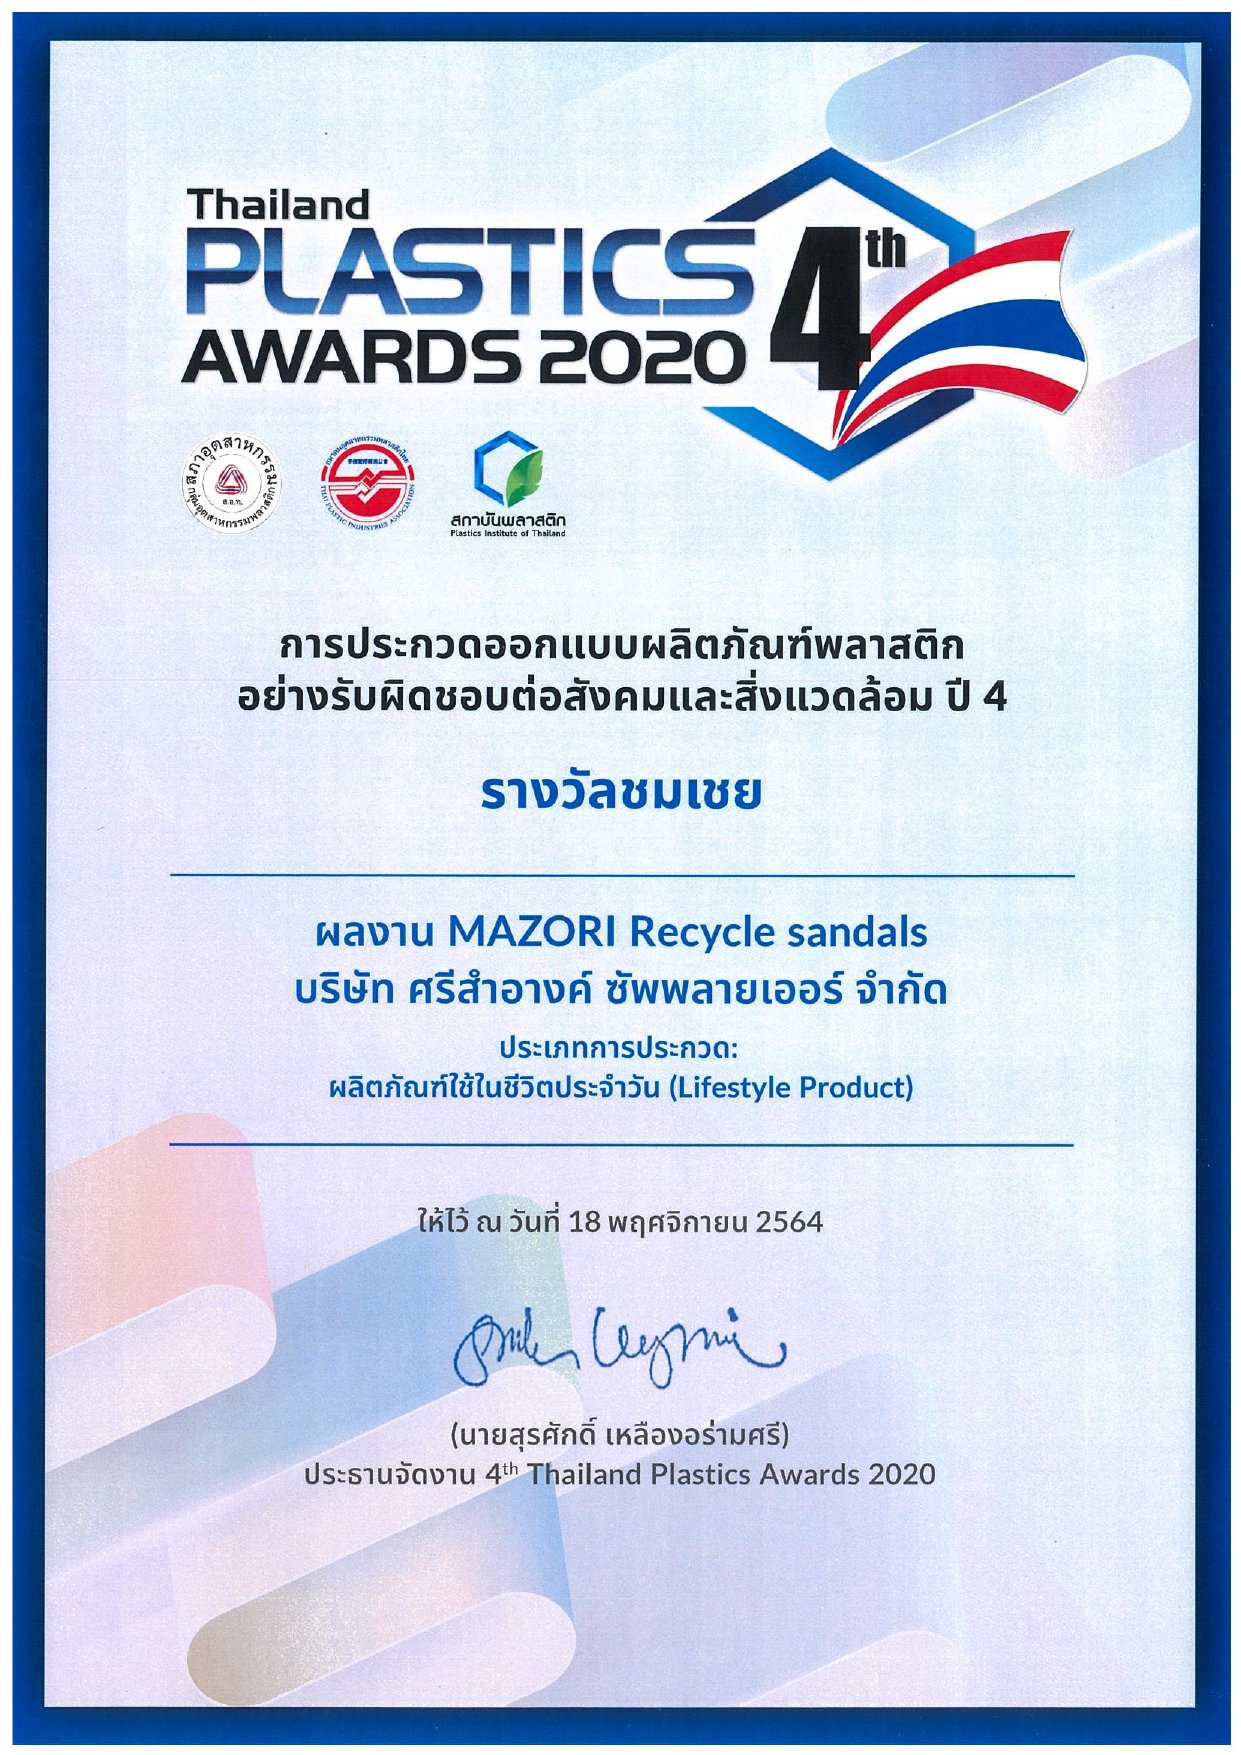 The 4th Thailand Plastics Awards 2020 project received an honorable mention.